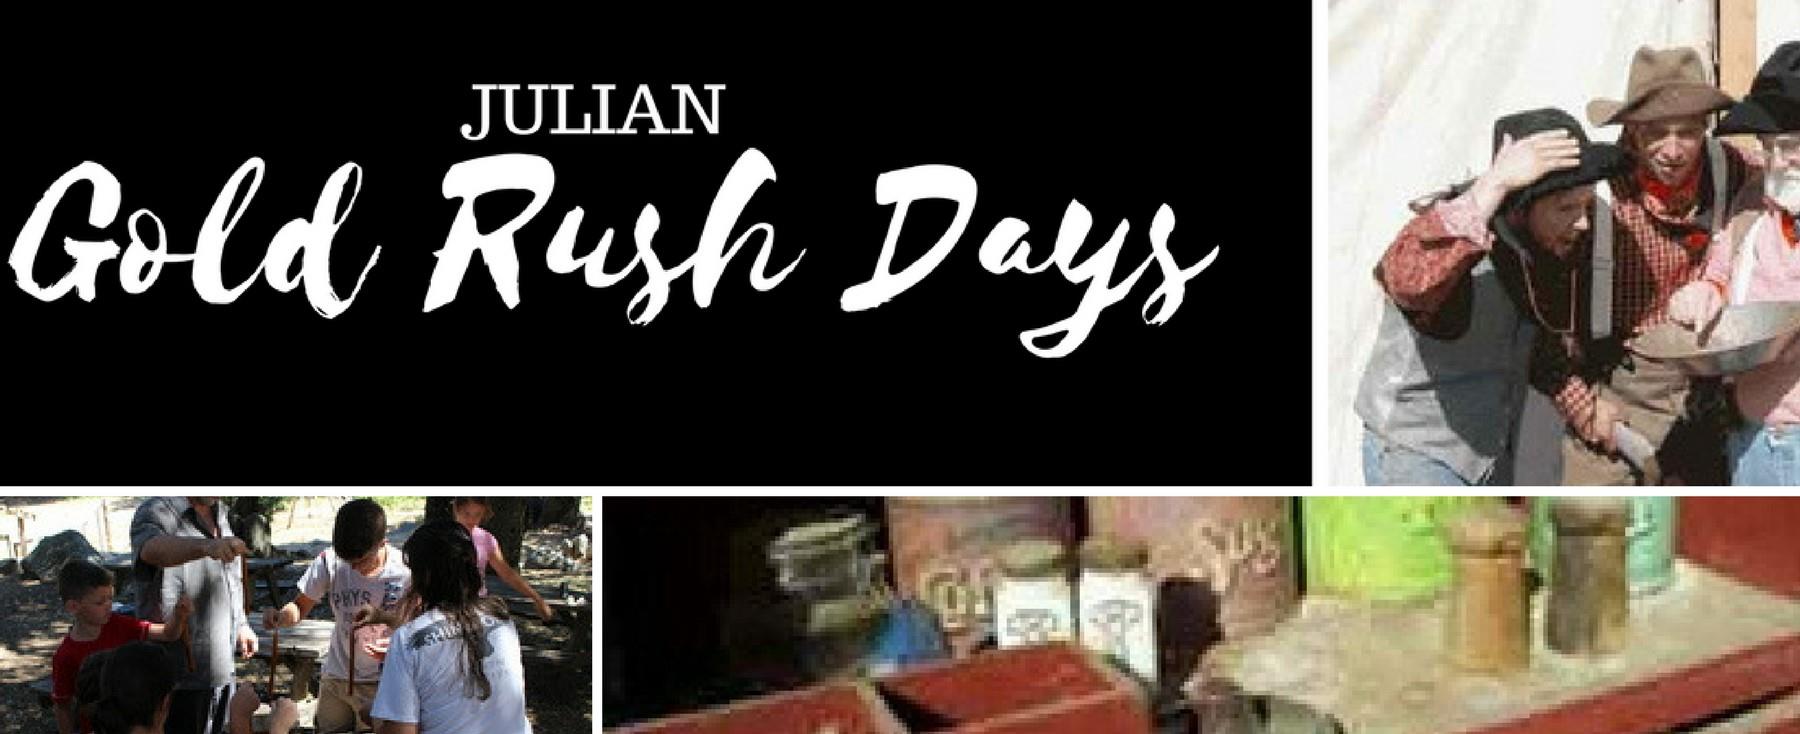 Julian Gold Rush Days - Top Things to Do in San Diego